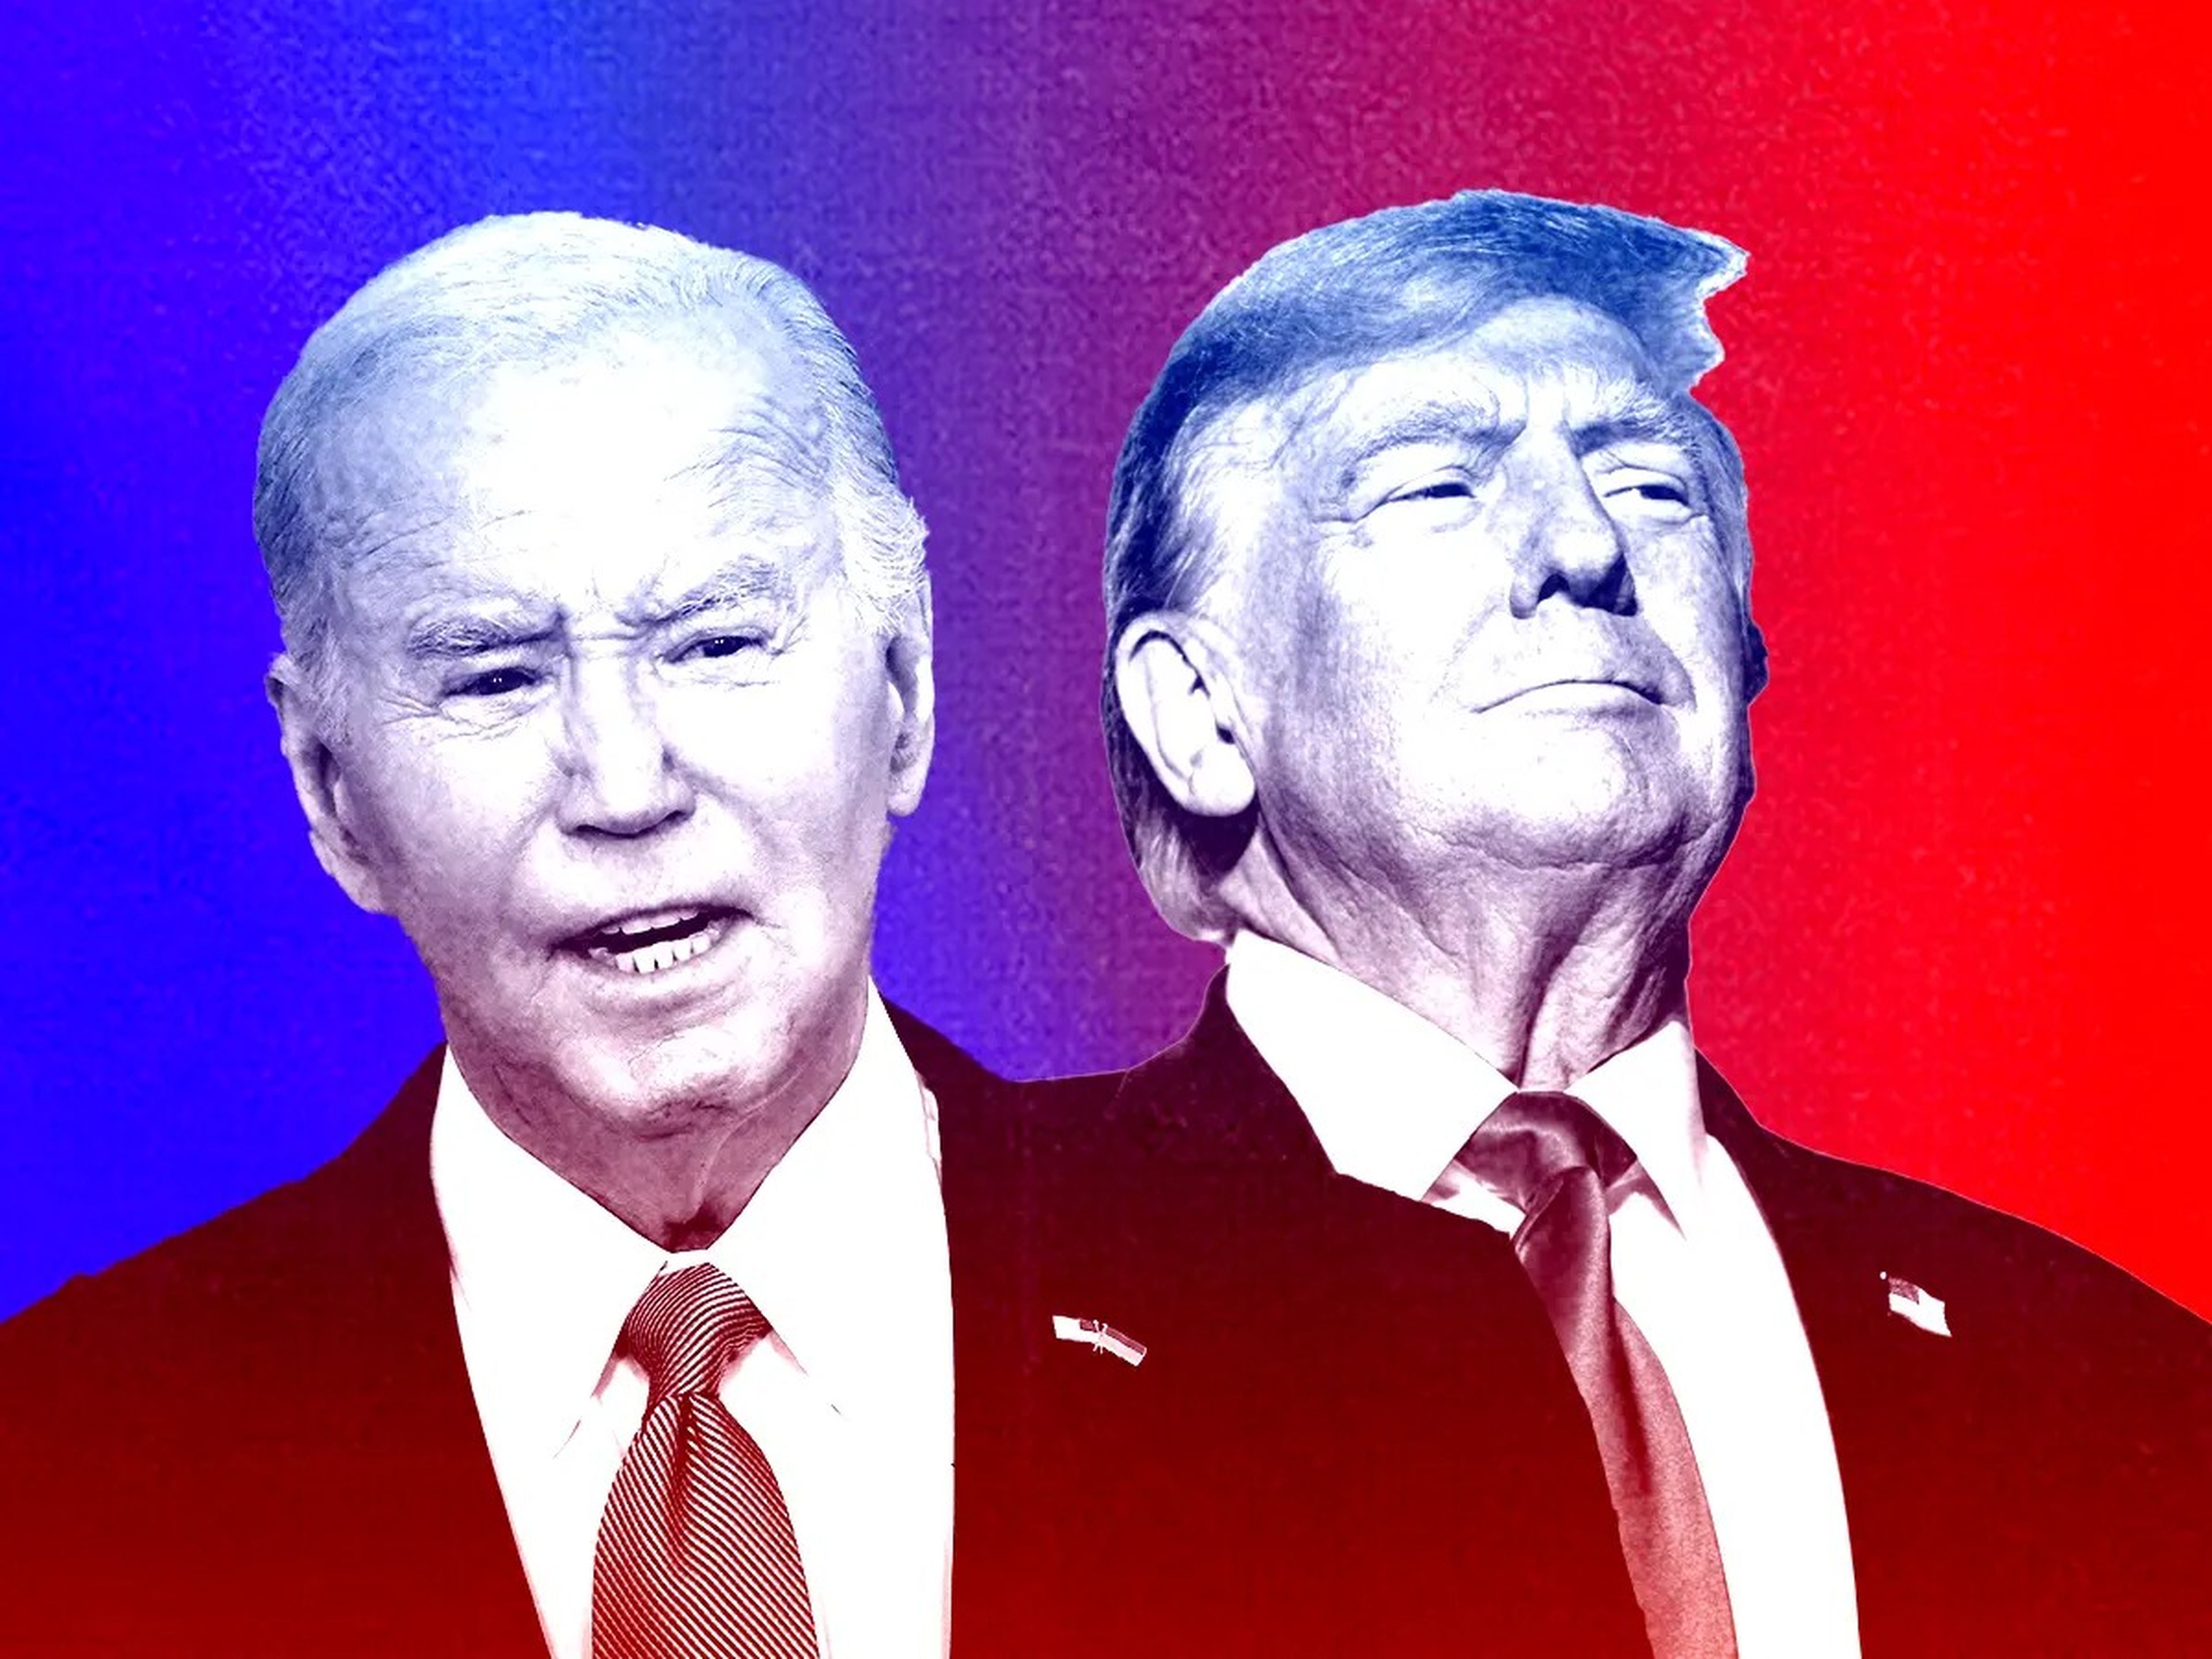 Joe Biden (left) and Donald Trump (right) against a red and blue background.